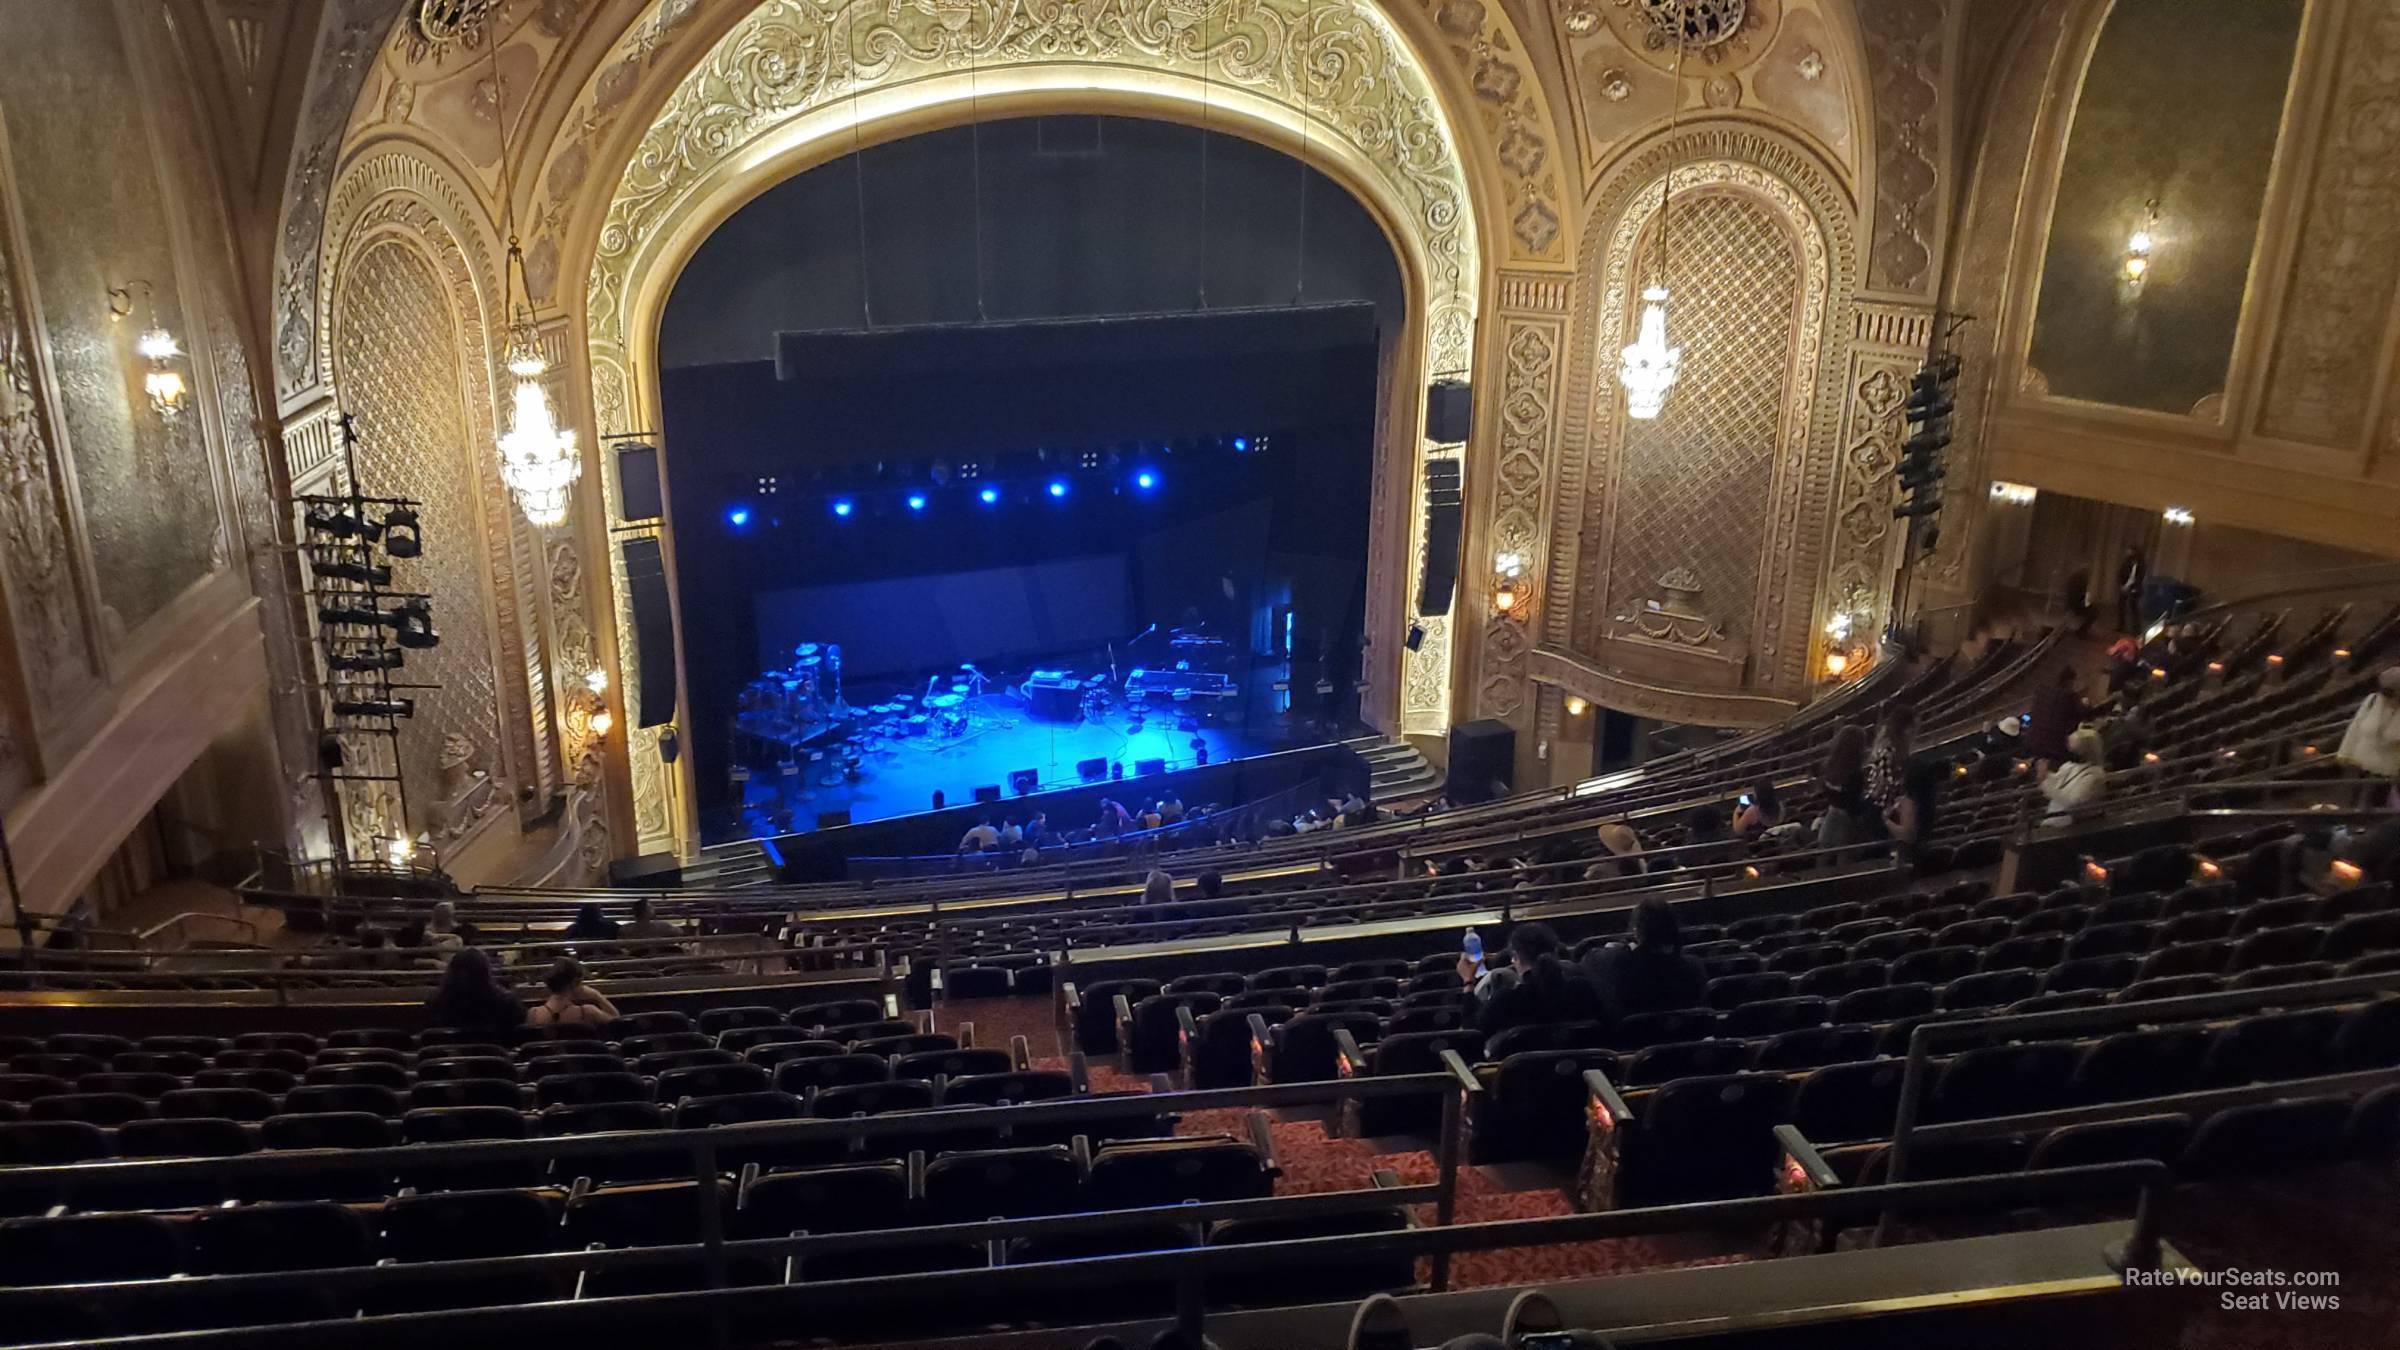 section 35, row v seat view  - paramount theatre - seattle